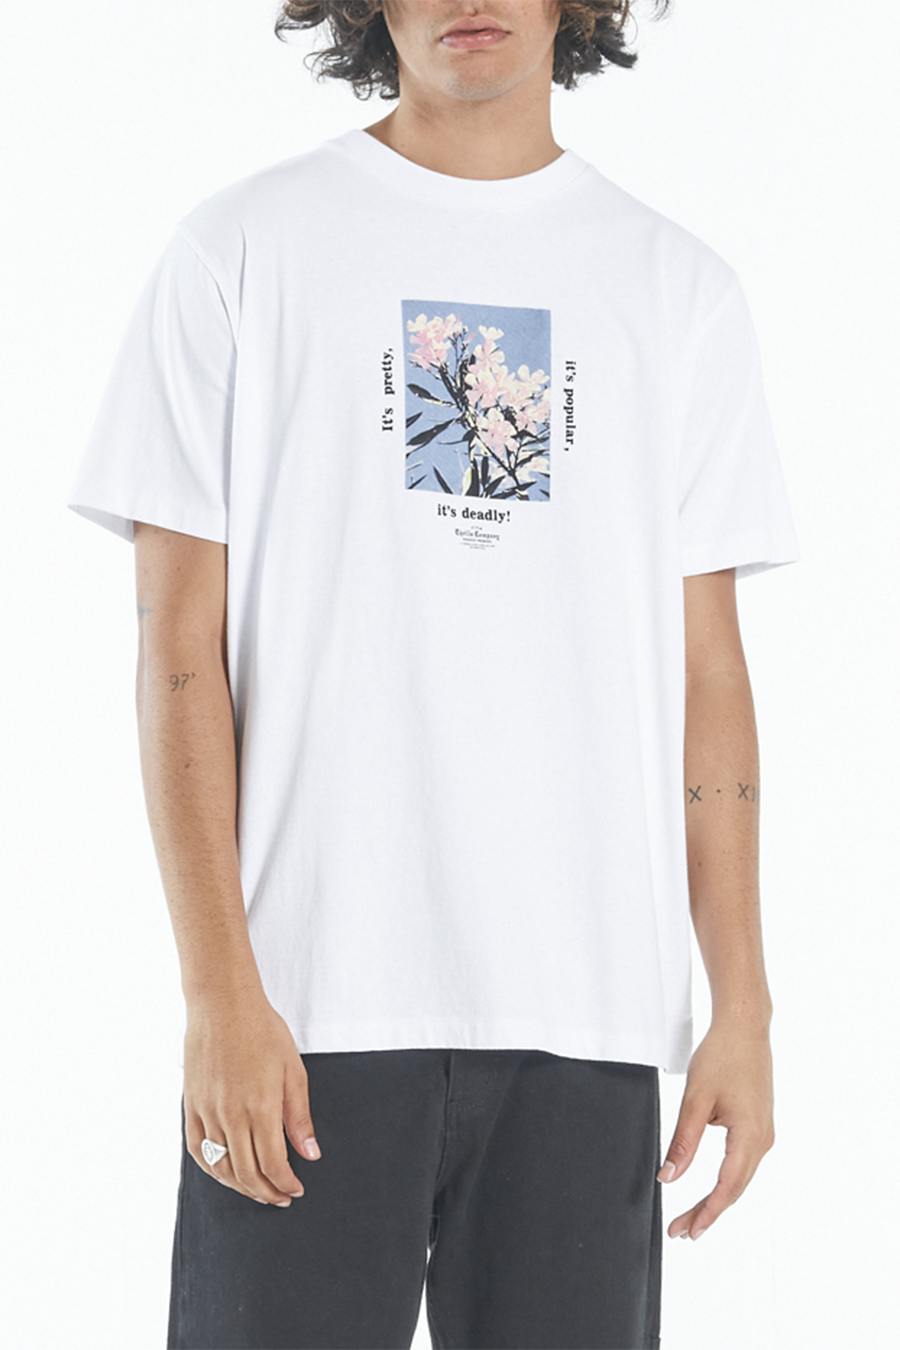 Pretty Deadly Popular Tee | White - Main Image Number 1 of 1